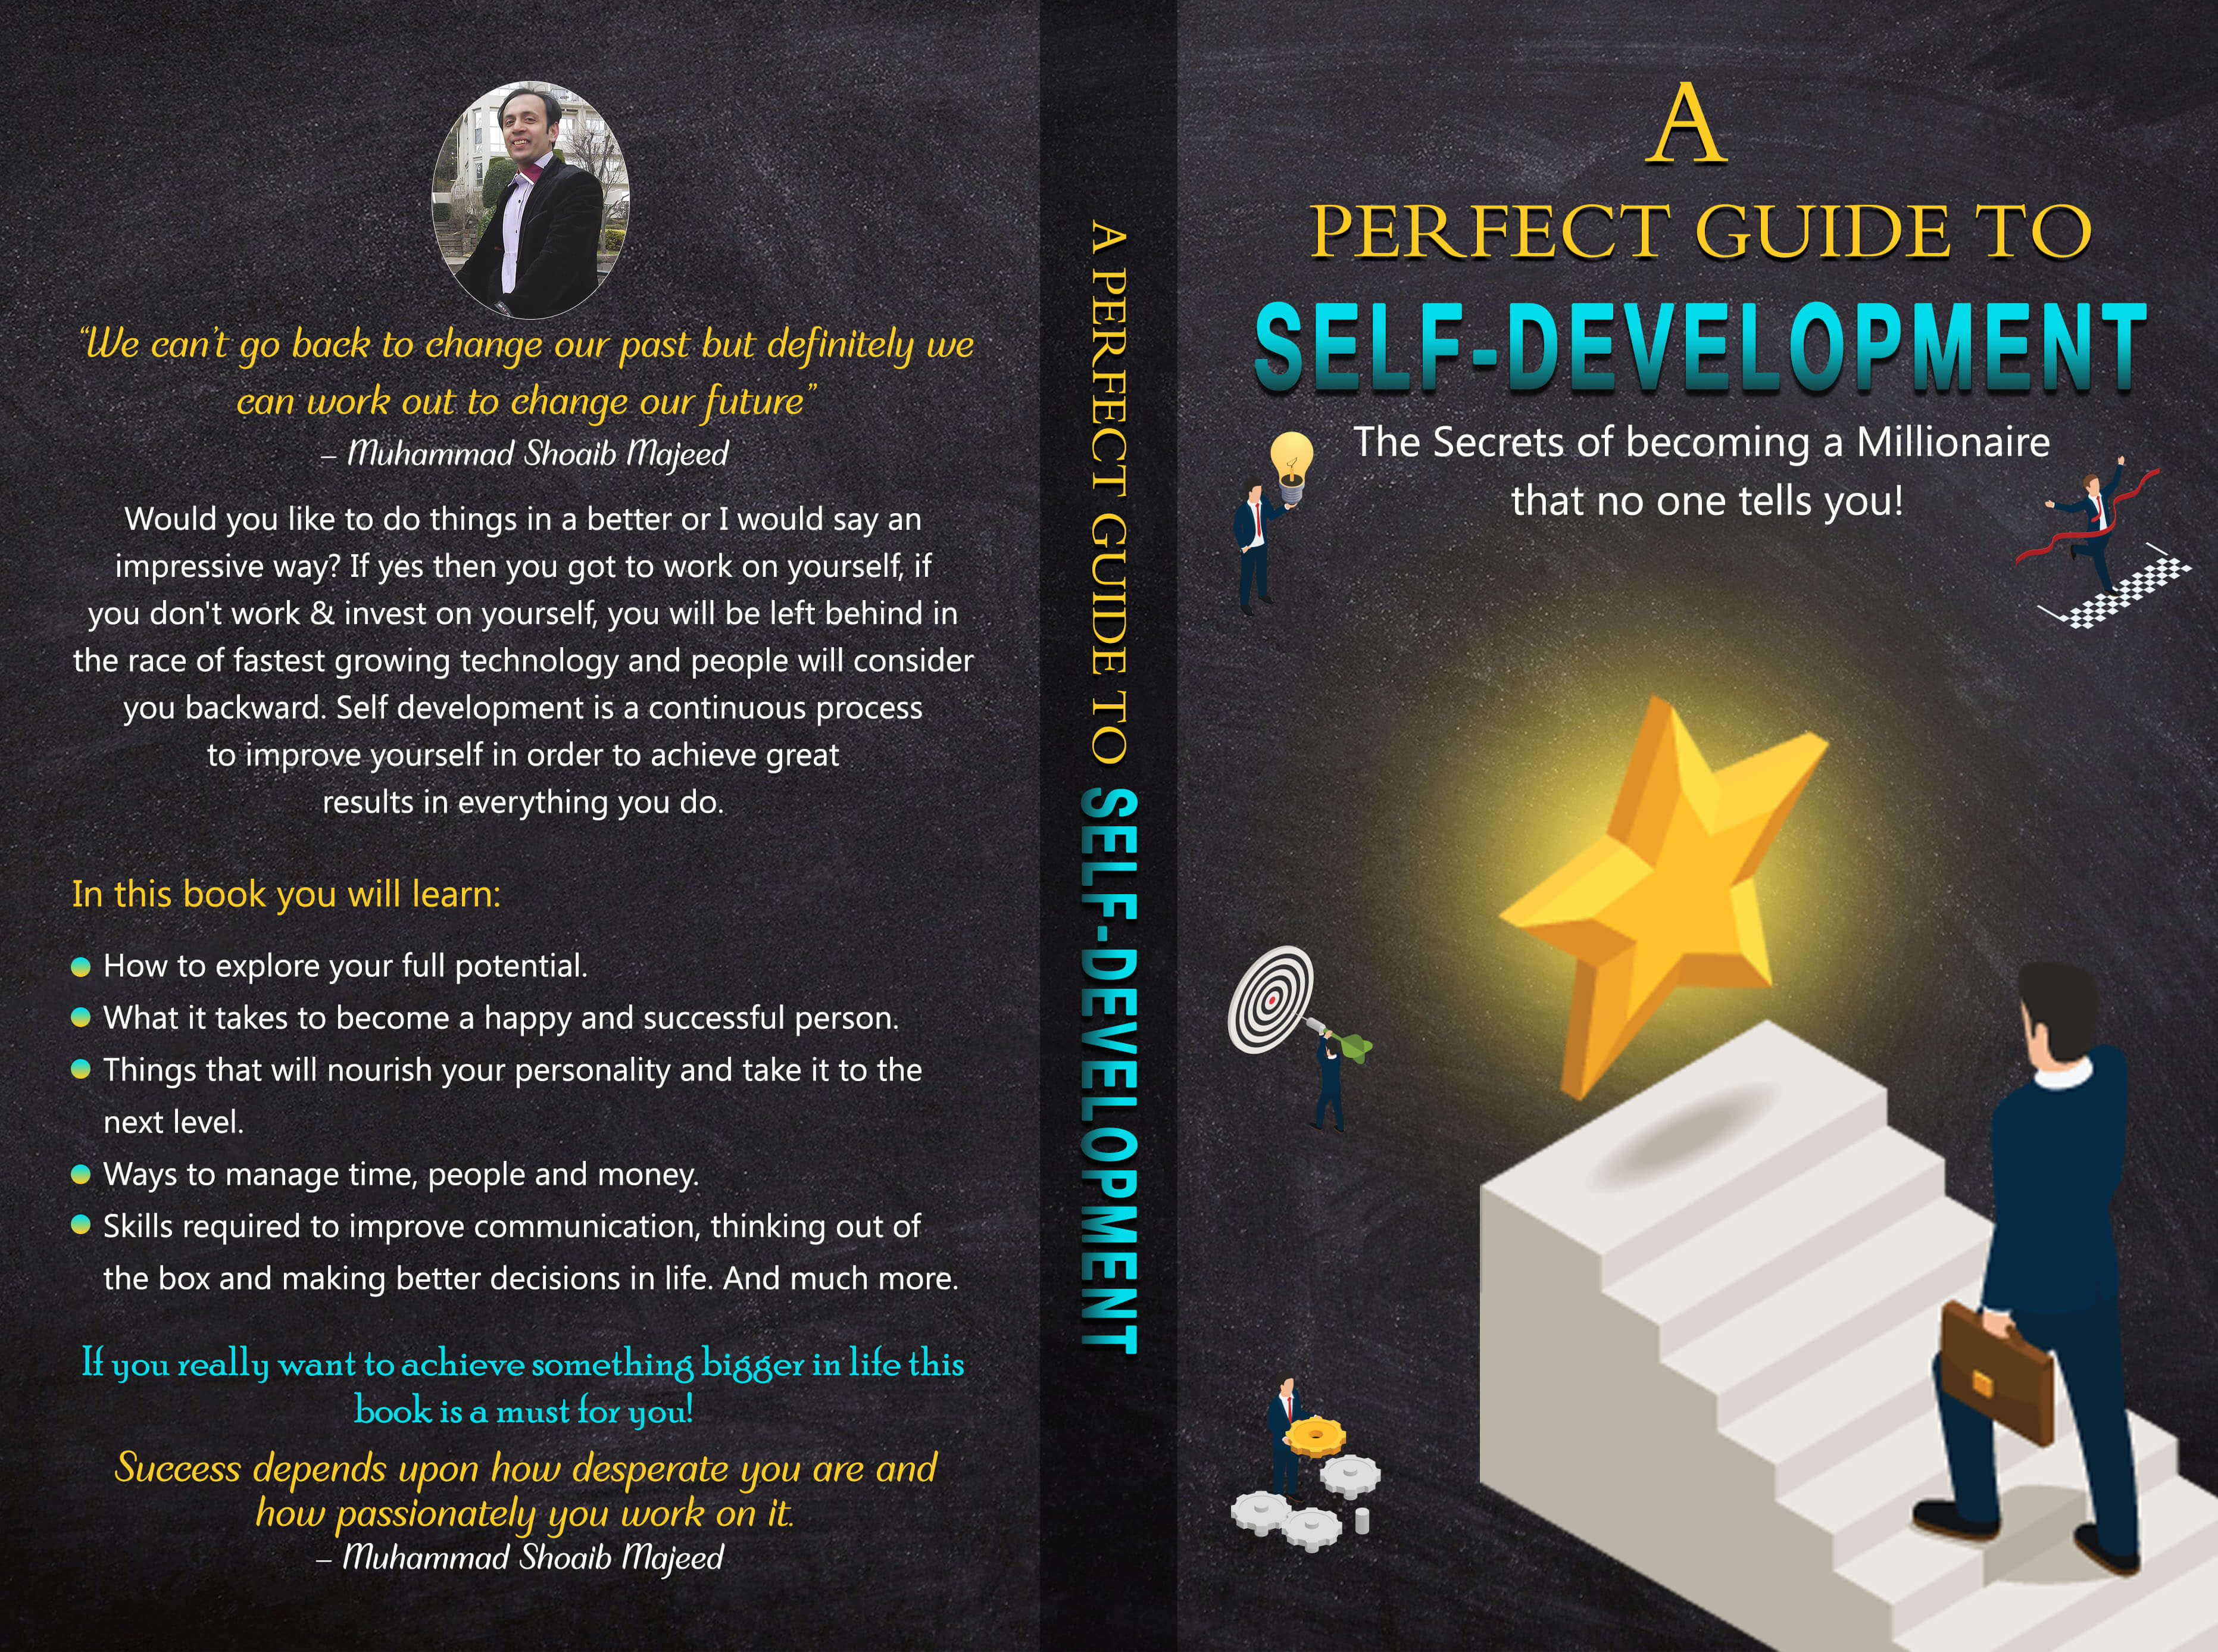 Perfect Guide front and back cover